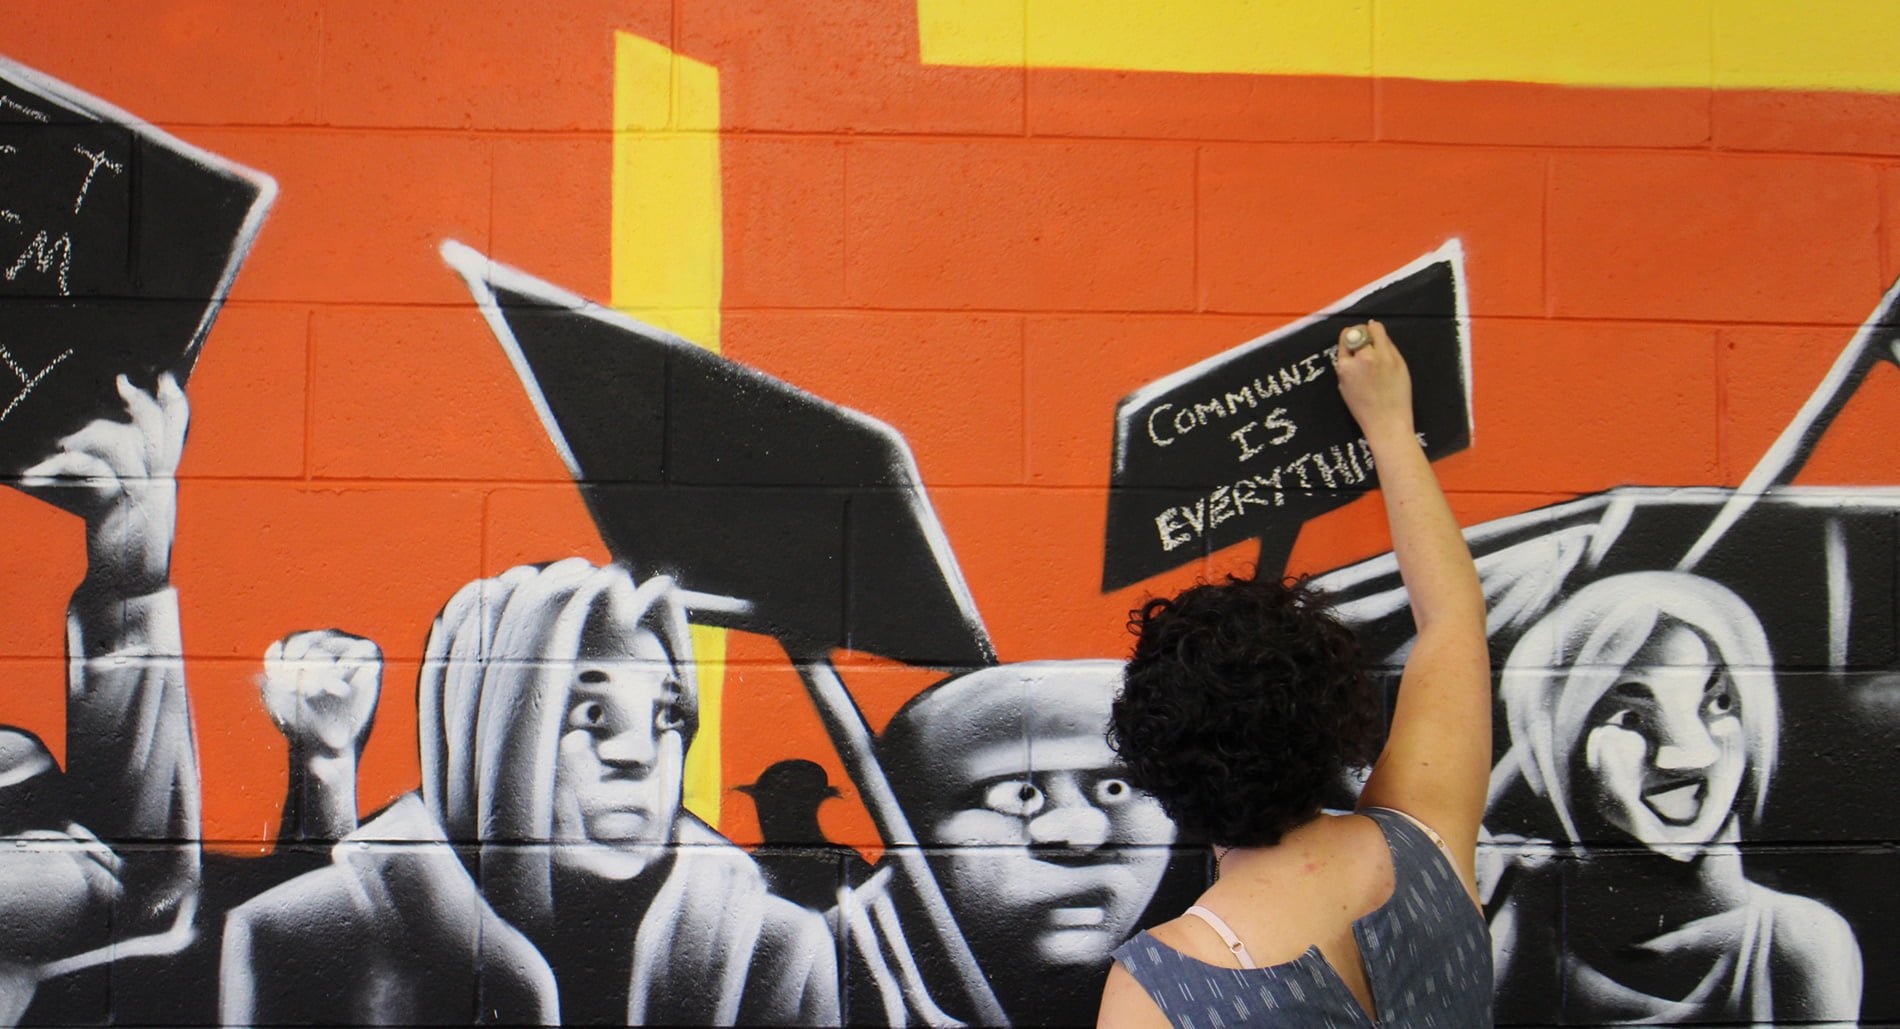 Activist Camille Furtado writing "Community is Everything" on Brisbane action centre art wall